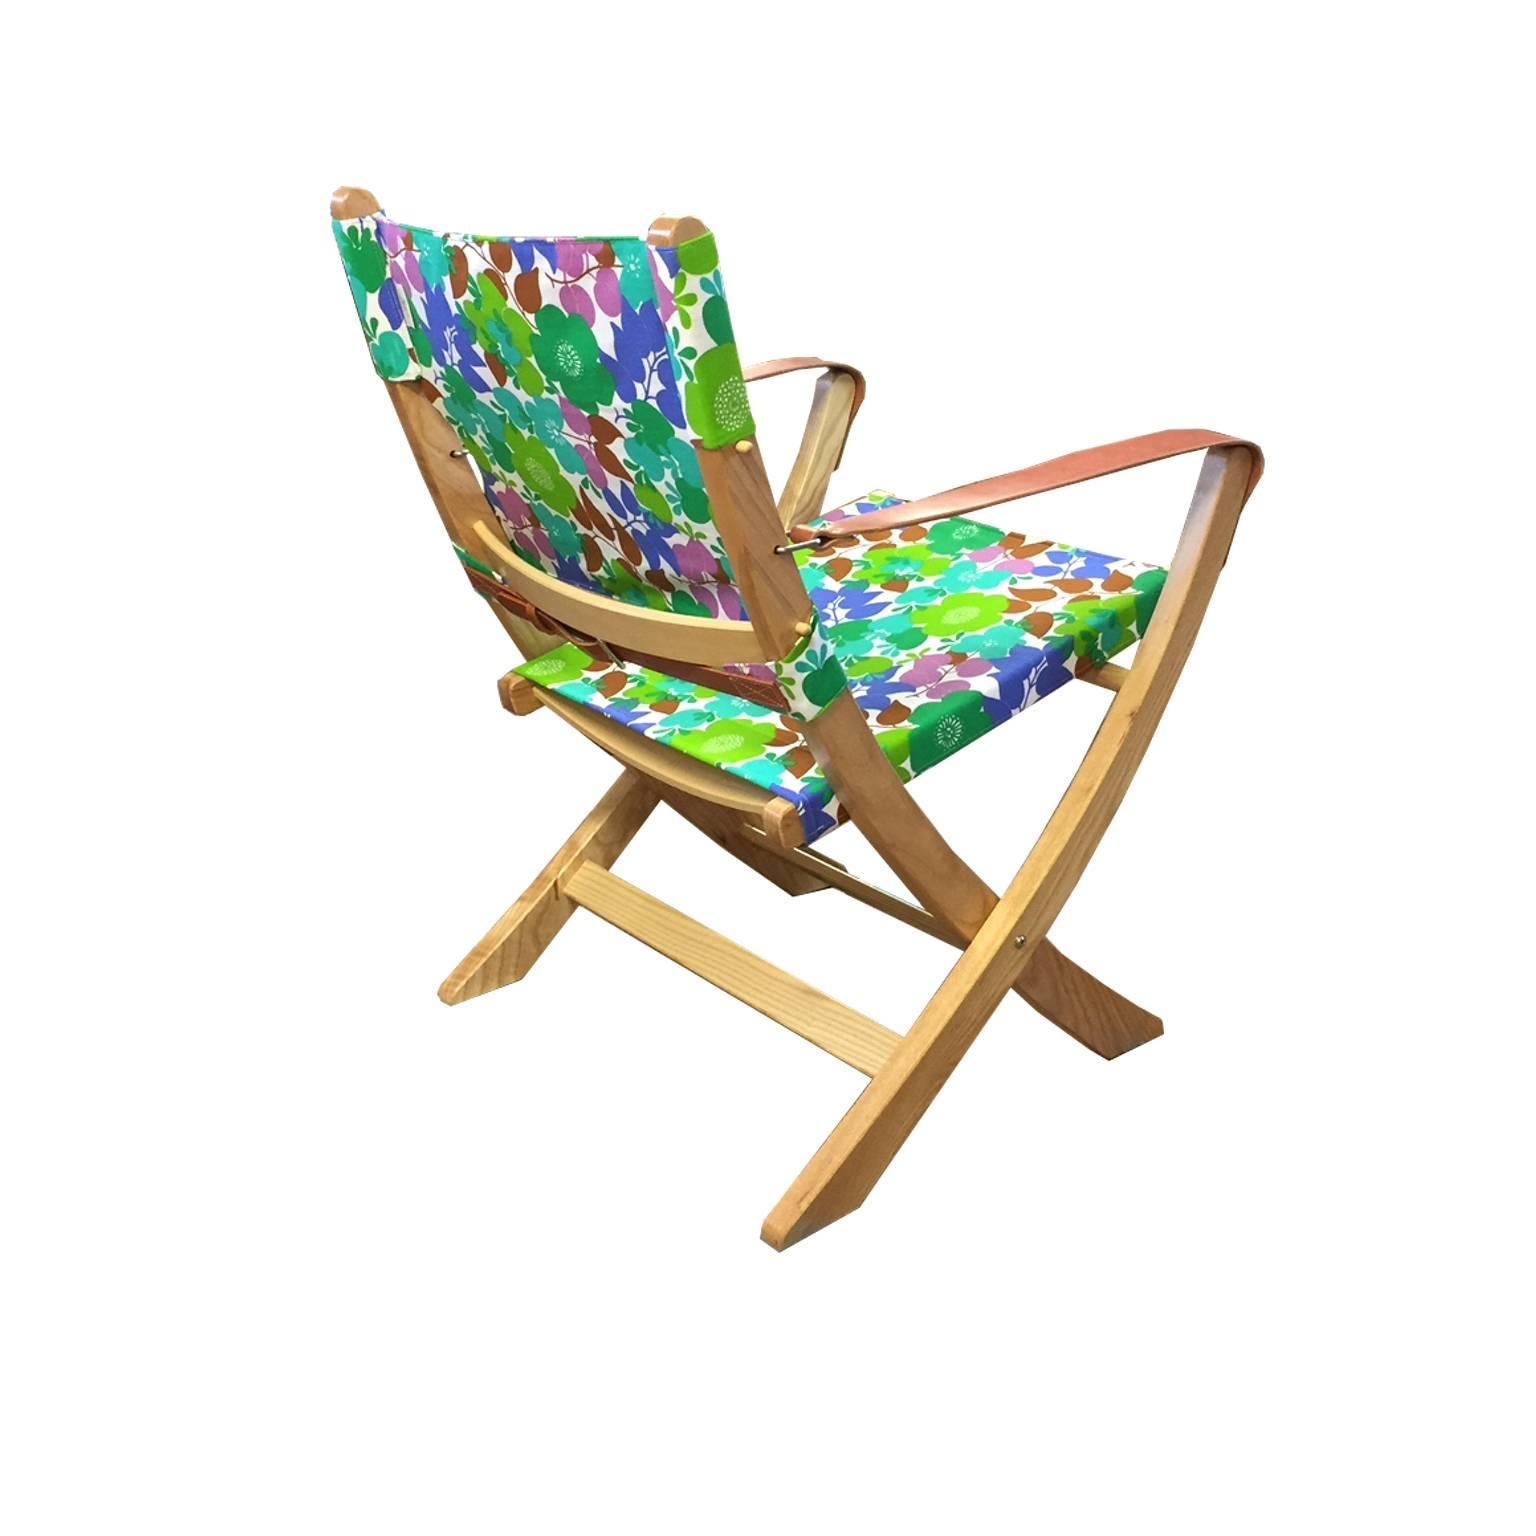 Sunbeam Jackie's iconic 'Champagne chair' design is inspired by the Campaign furniture tradition, beautifully made folding furniture for military camps. We have added a dash of Sunbeam Jackie exuberance and tweaked the name for that special